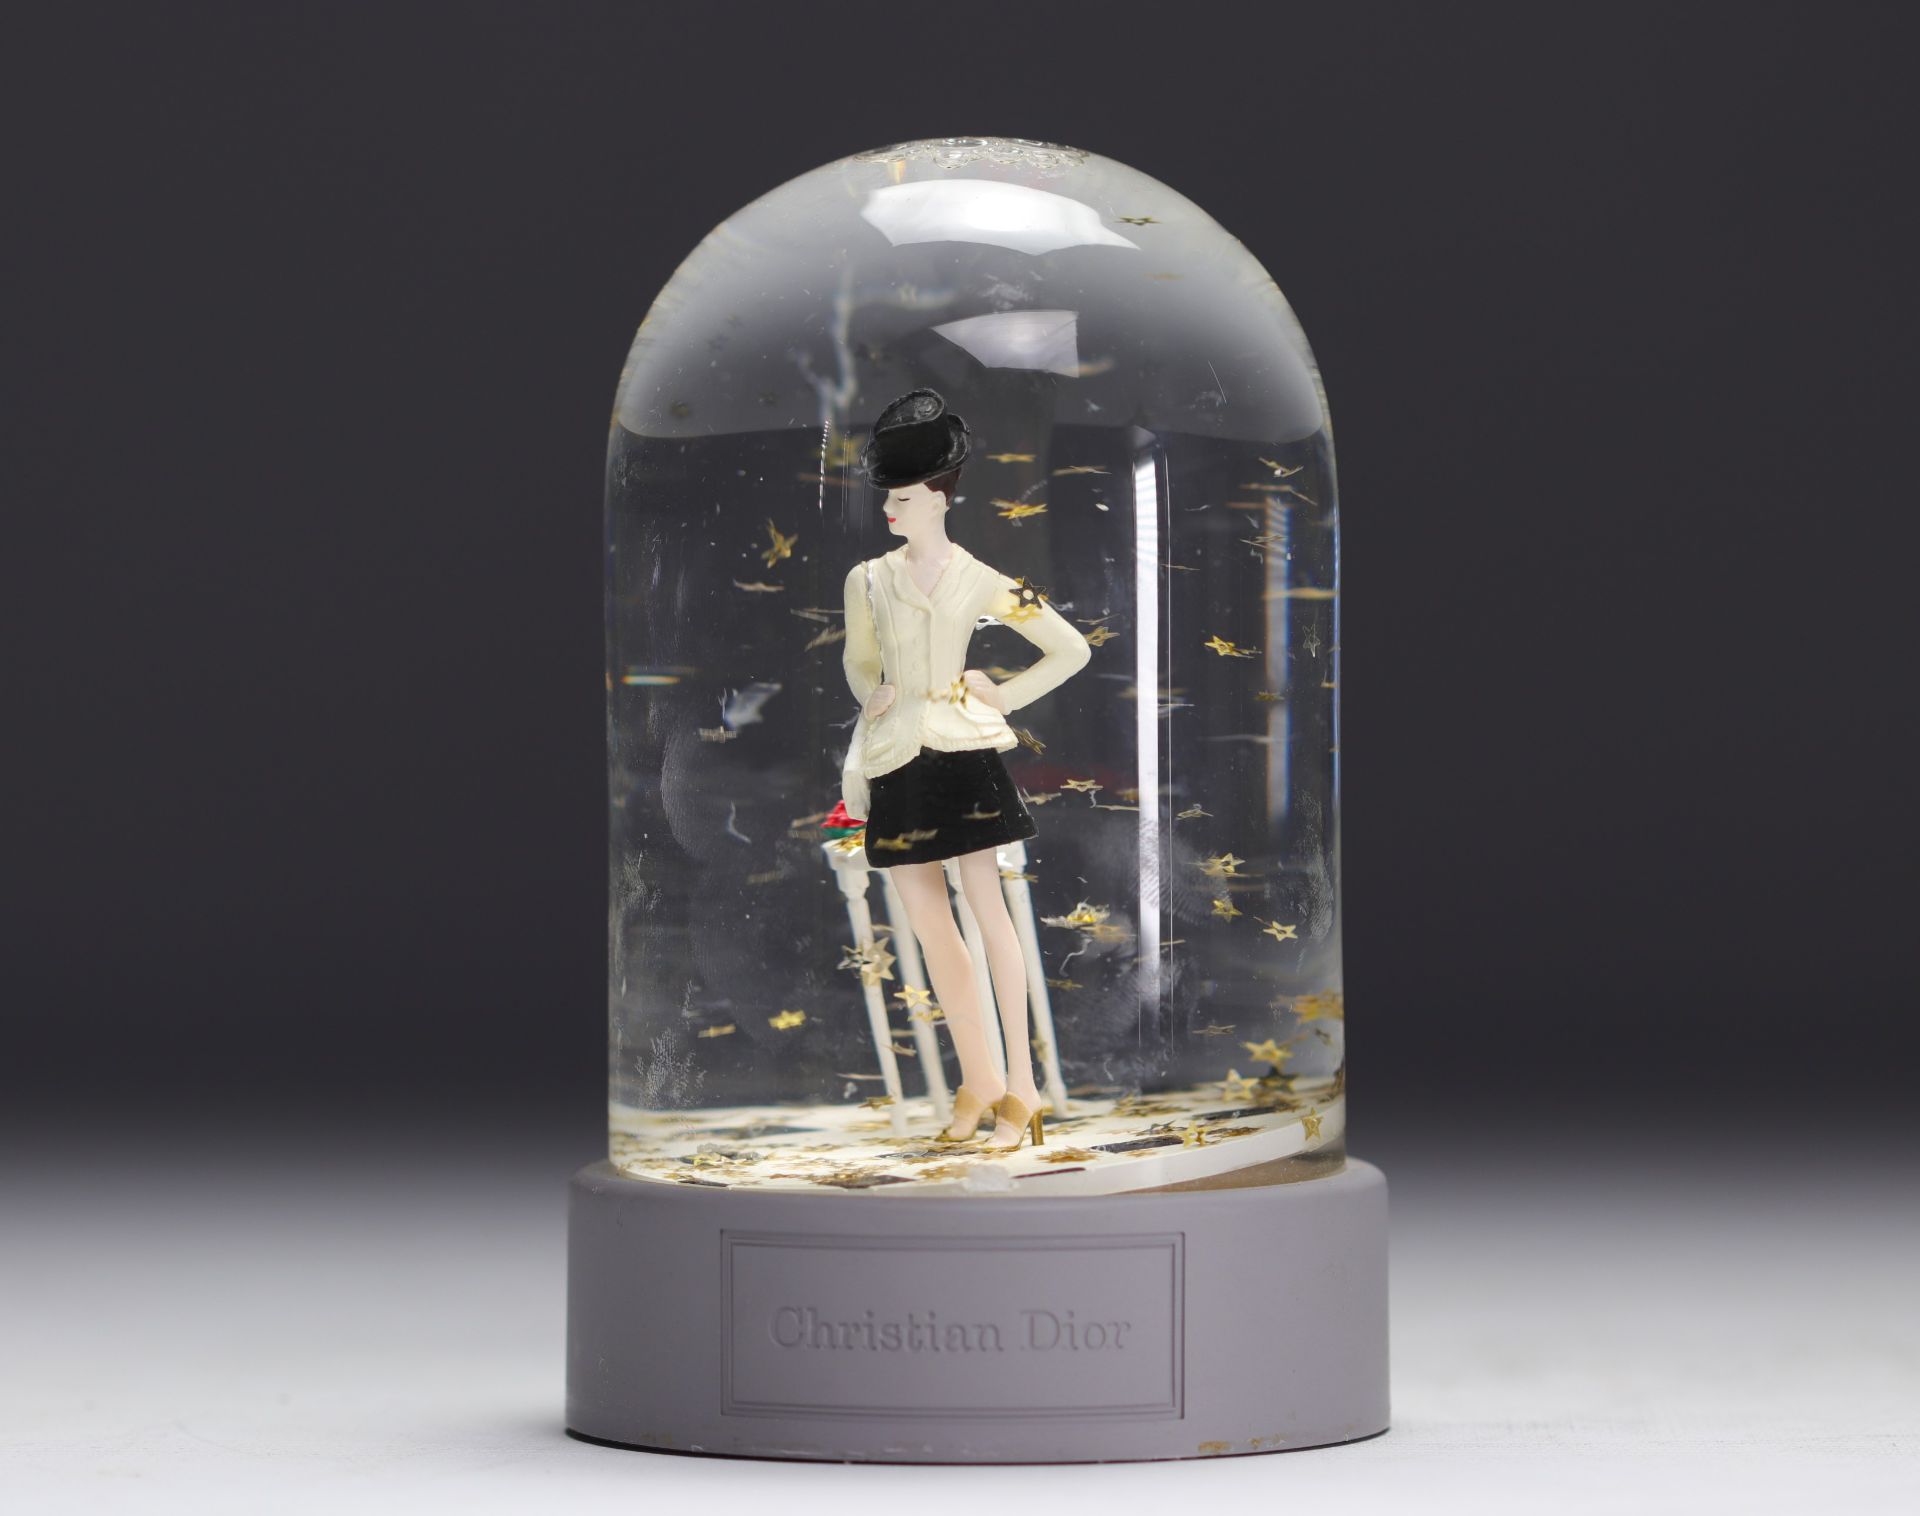 Christian Dior. 1997. Snow globe with golden star flakes featuring a customer from the Avenue Montai - Image 3 of 3